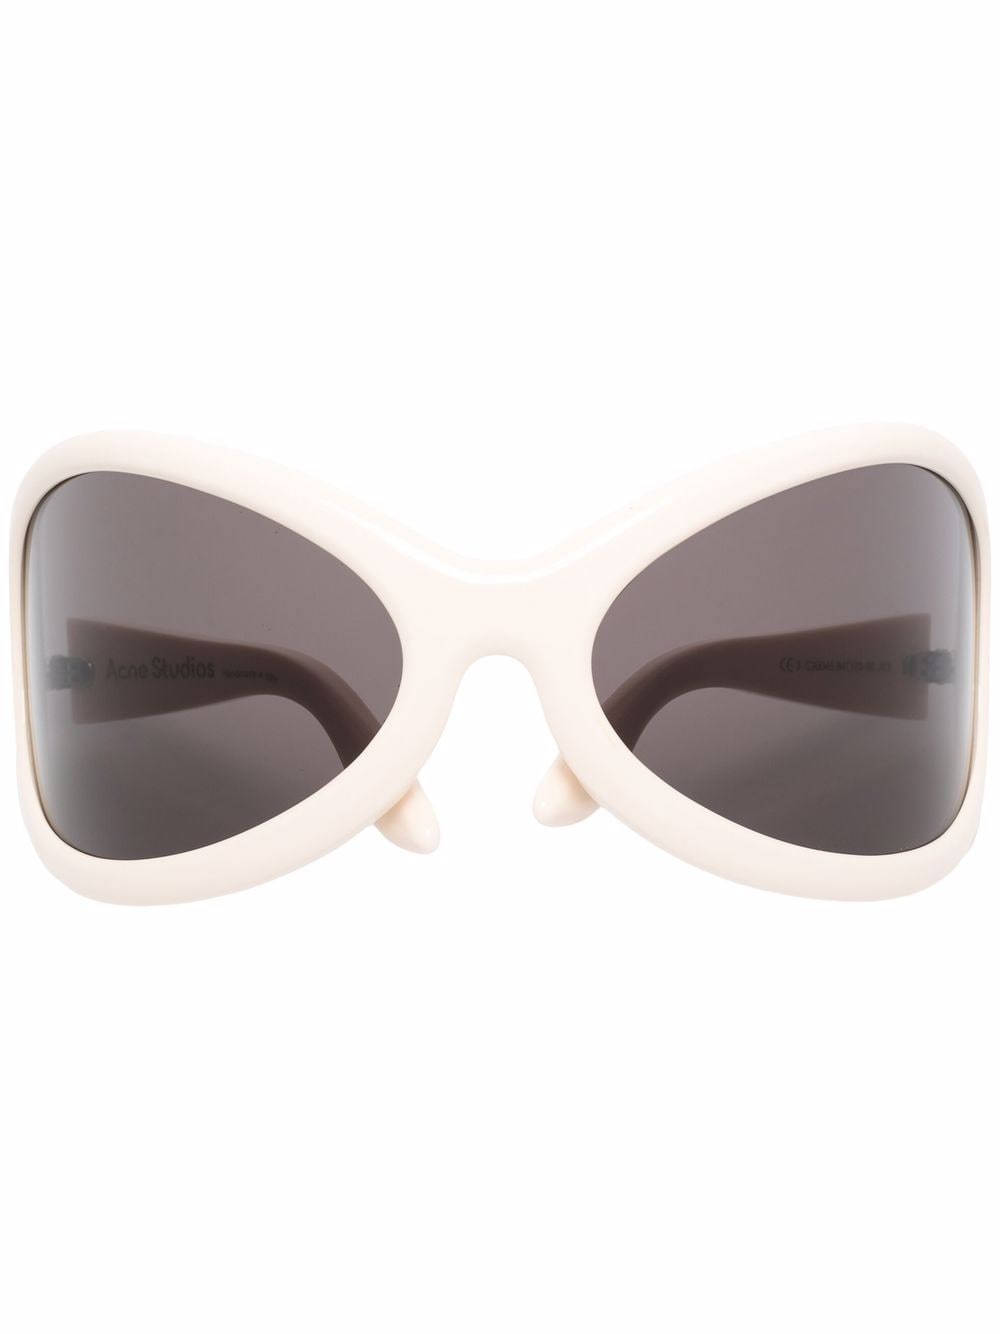 Cat-eye, Retro Square, Oval, Round Sunglasses Price in India - Buy Cat-eye,  Retro Square, Oval, Round Sunglasses online at Shopsy.in